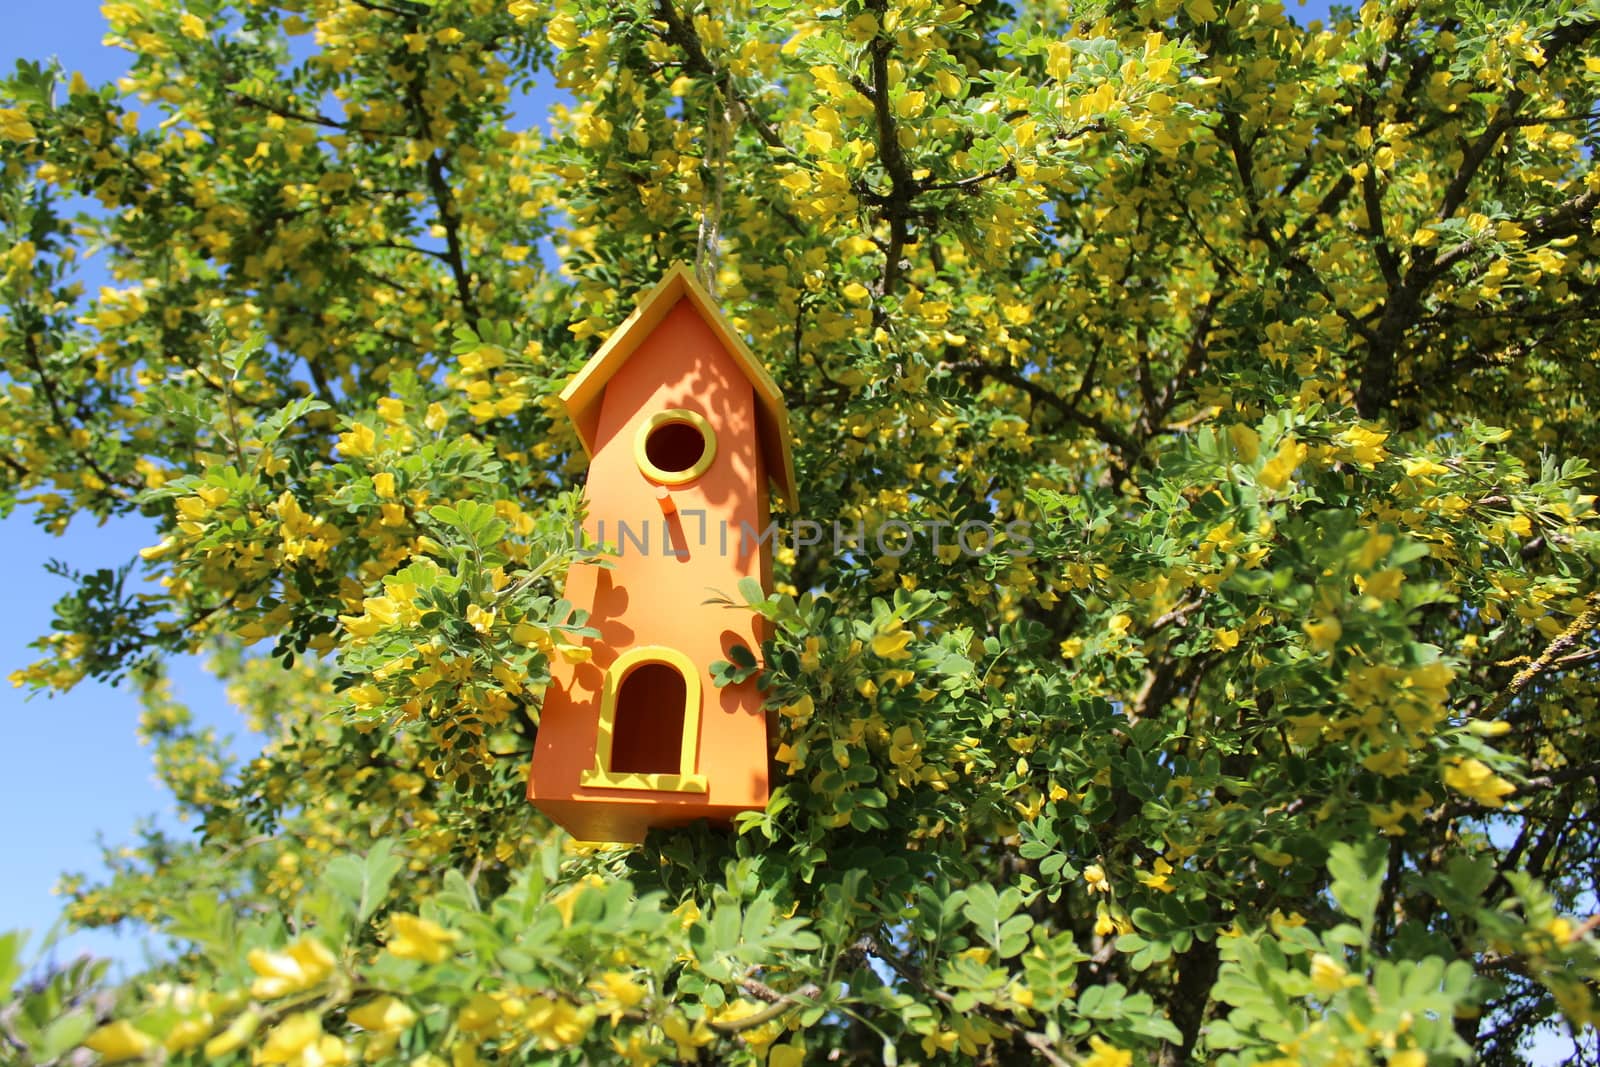 The picture shows a bird house in the tree.